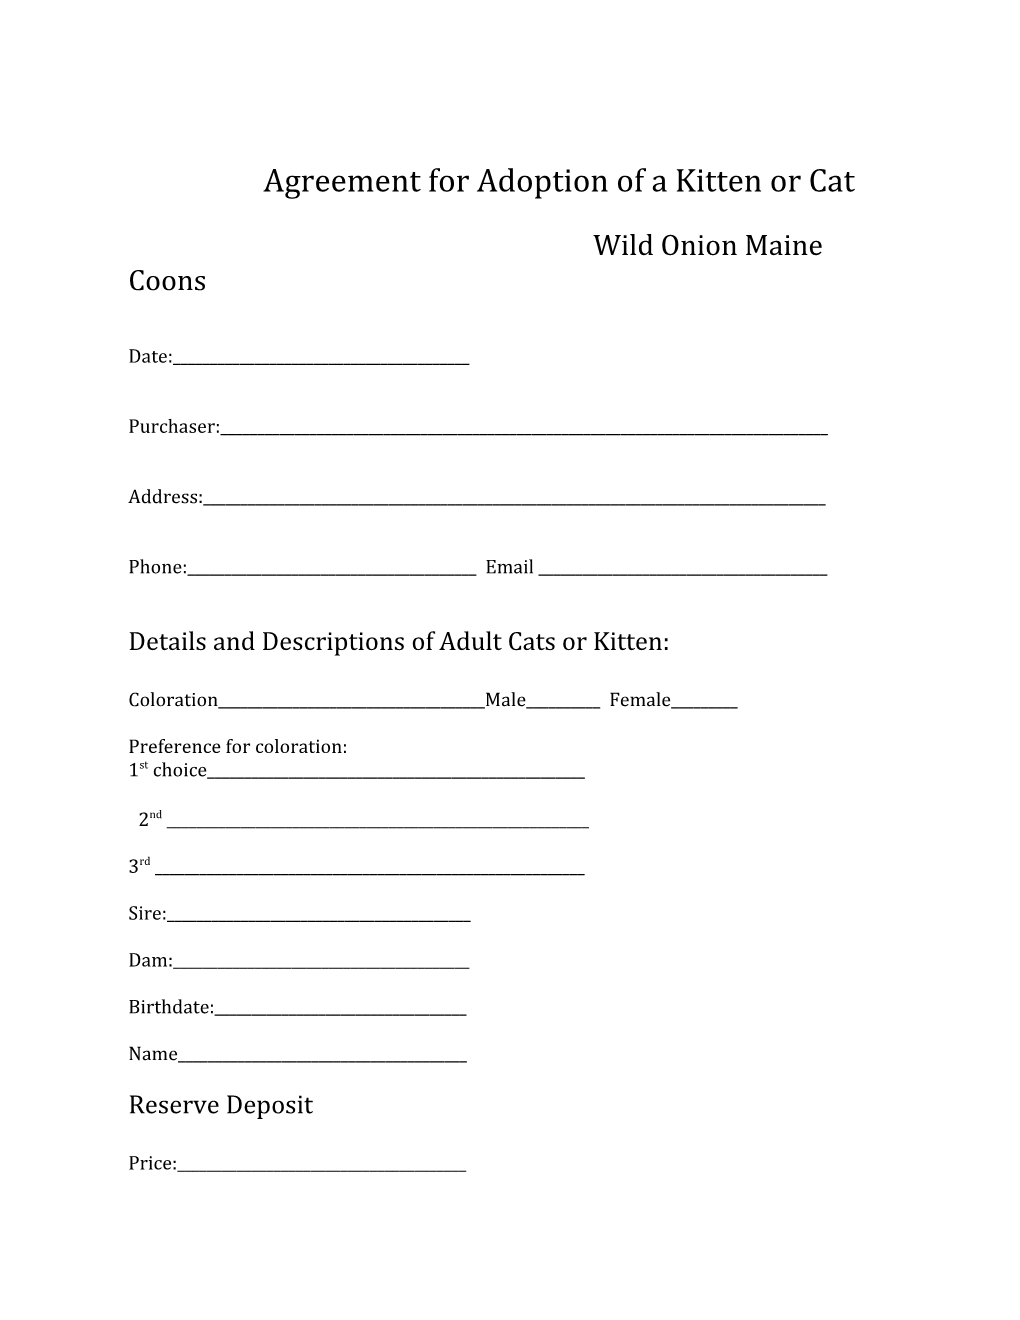 Agreement for Adoption of a Kitten Or Cat